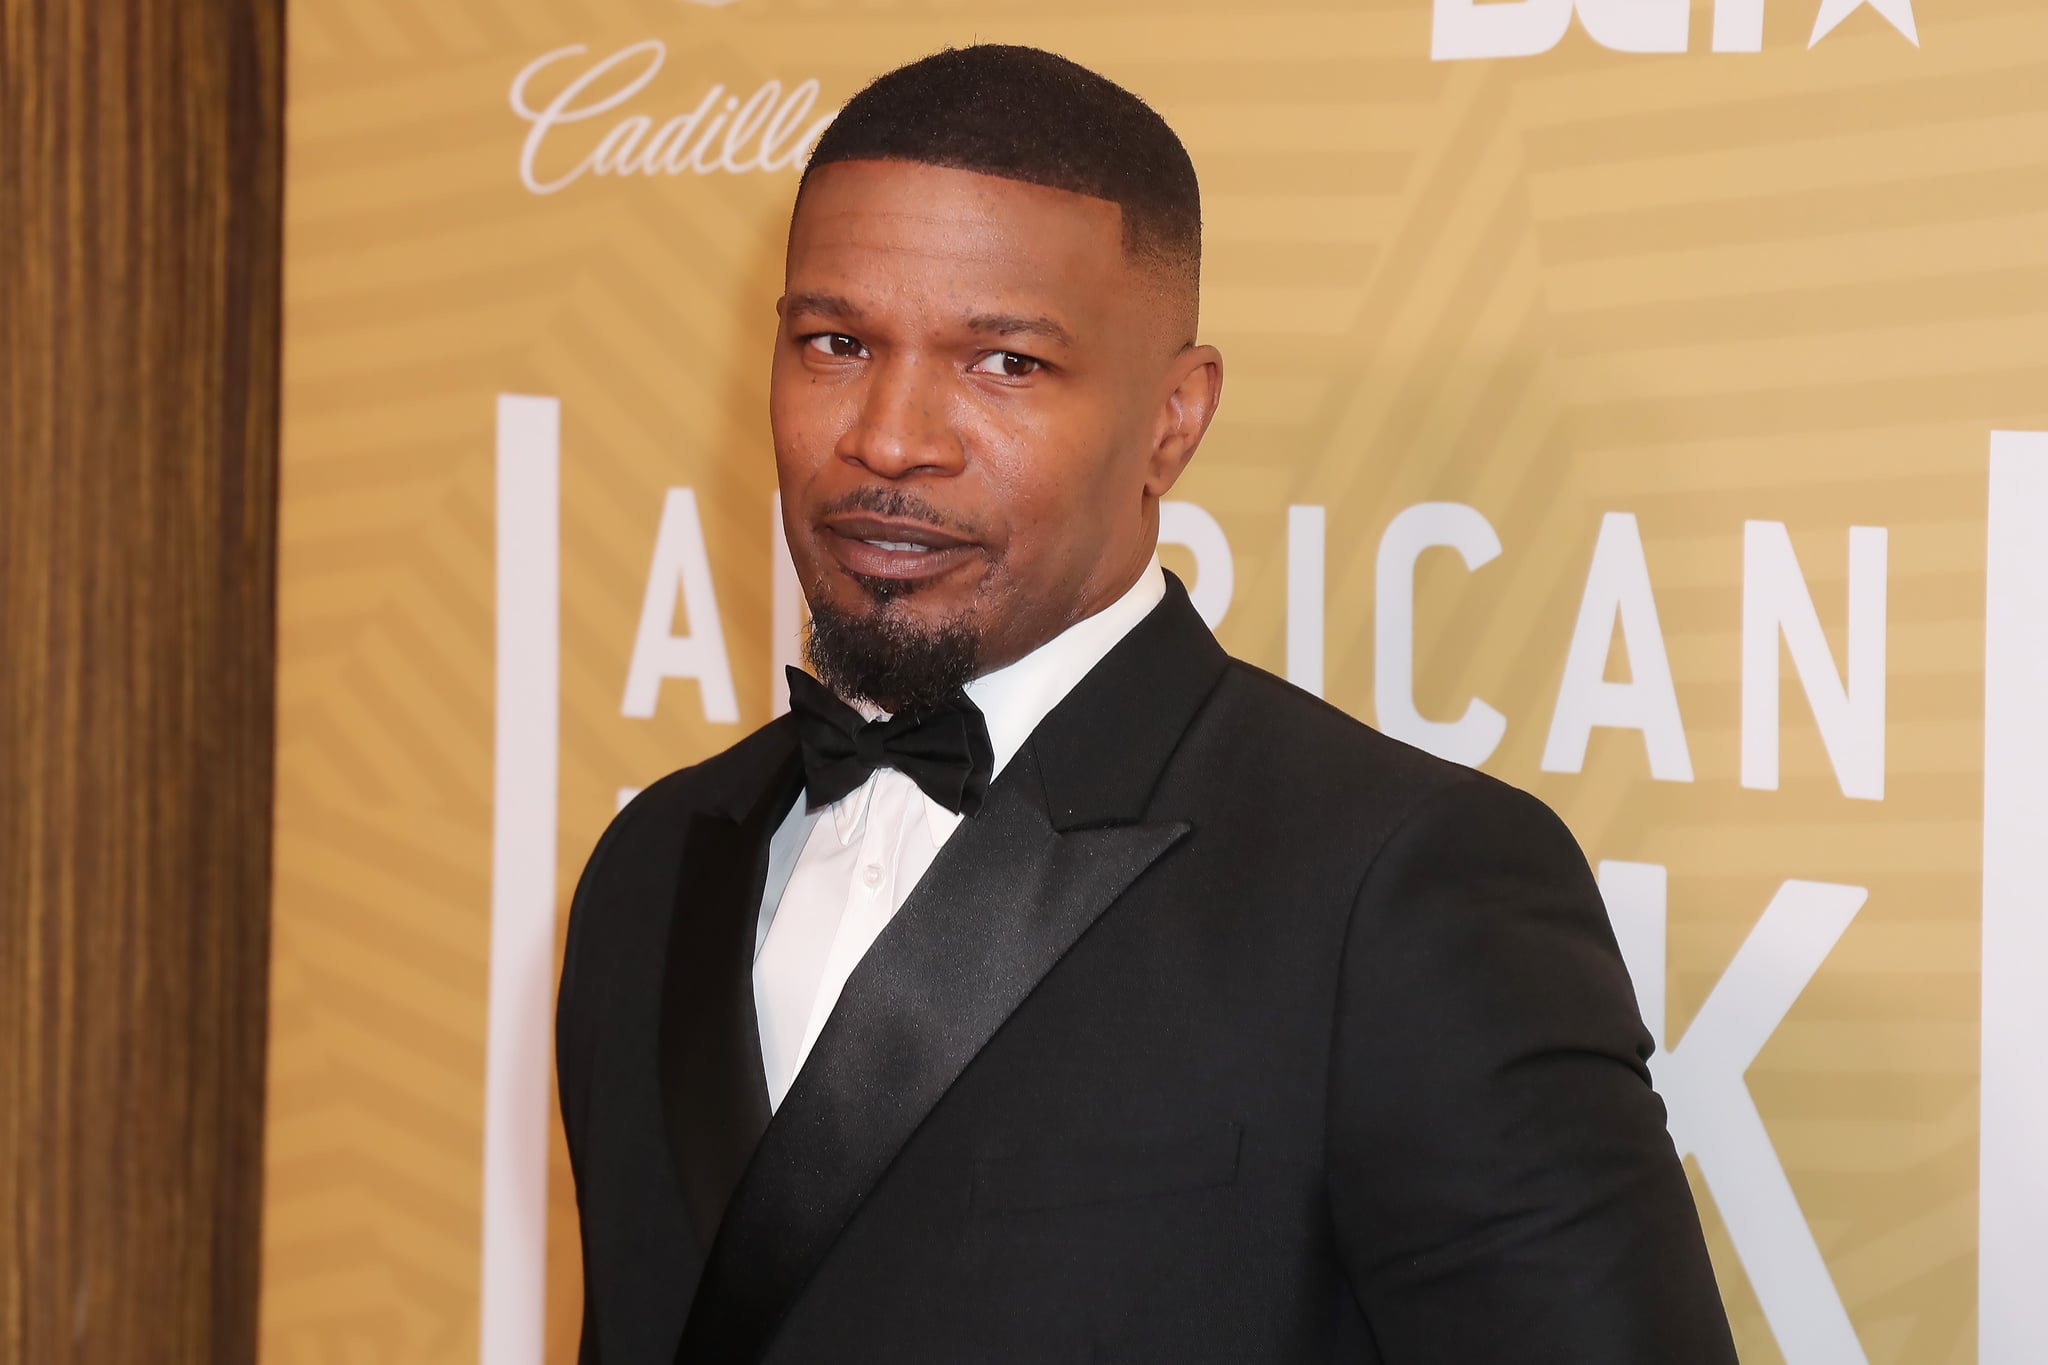 BEVERLY HILLS, CALIFORNIA - FEBRUARY 23: Jamie Foxx attends American Black Film Festival Honors Awards Ceremony at The Beverly Hilton Hotel on February 23, 2020 in Beverly Hills, California. (Photo by Leon Bennett/WireImage)